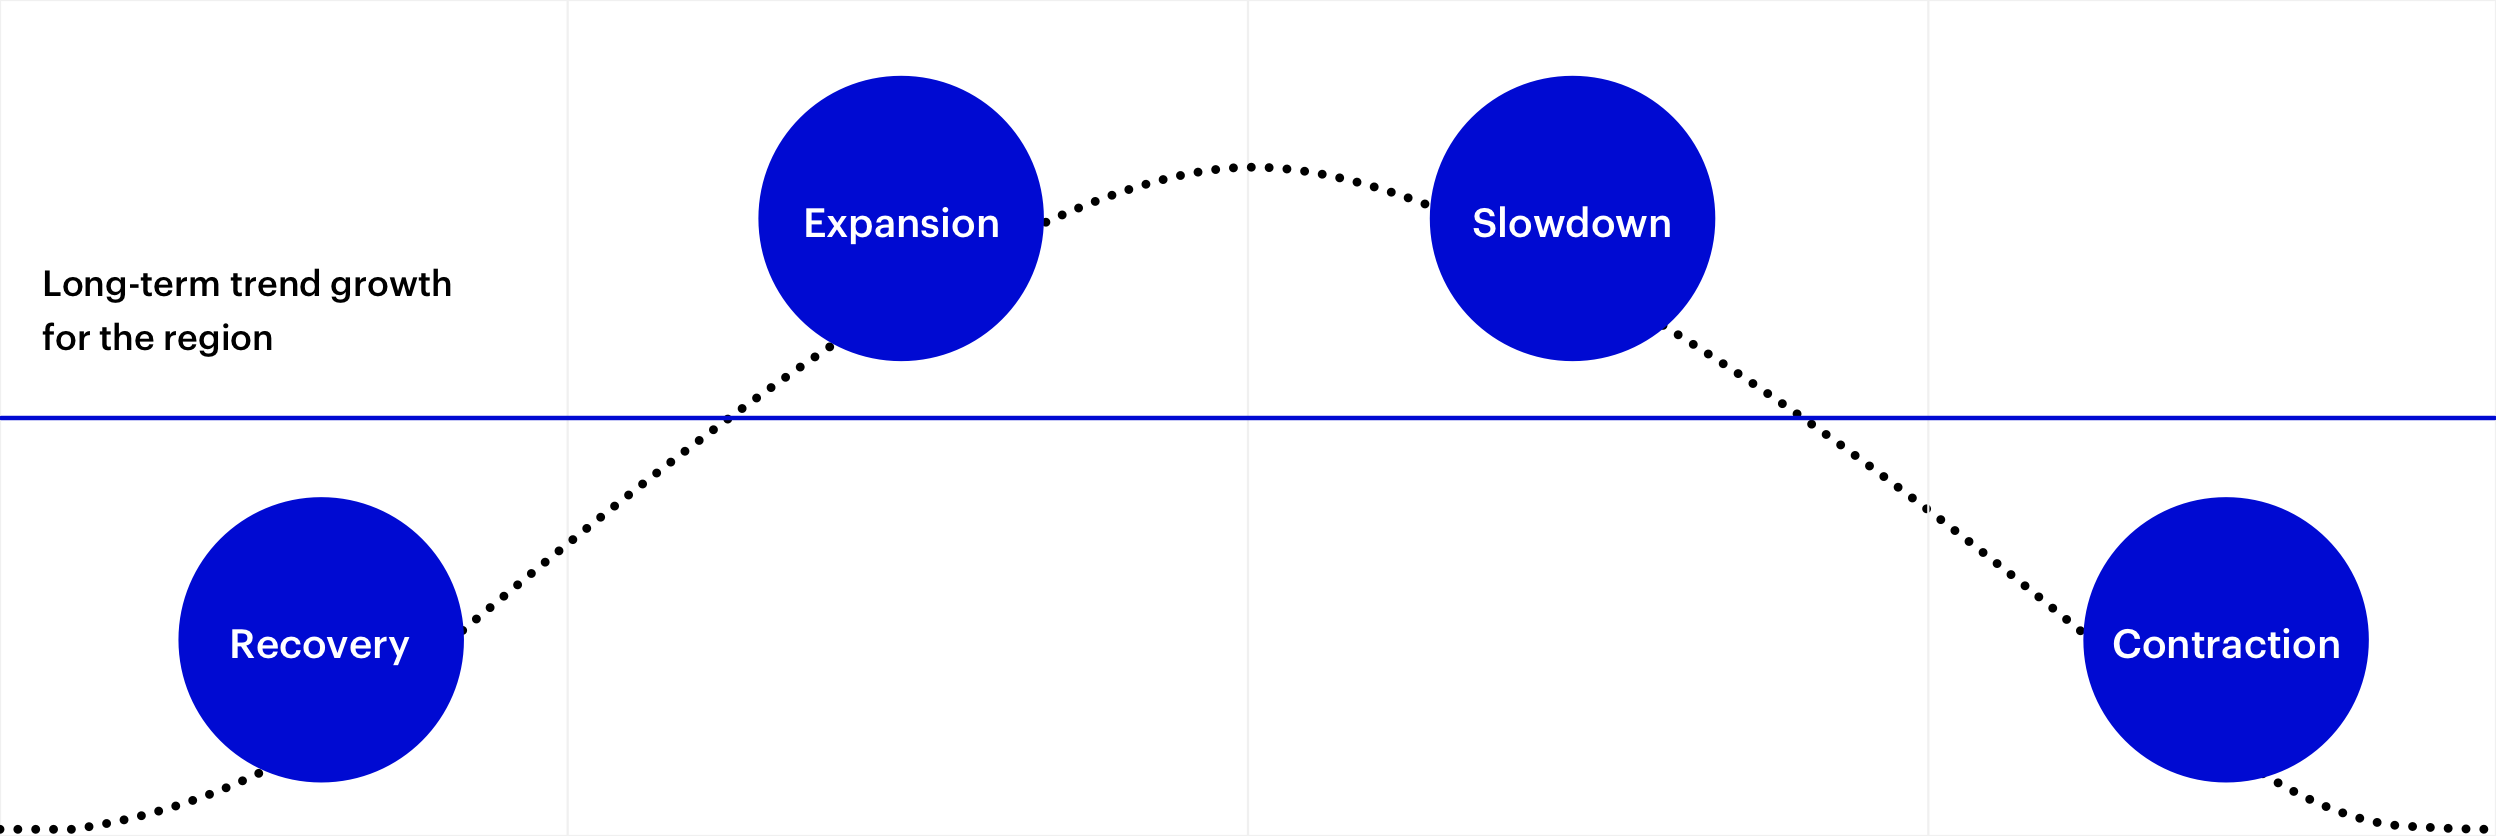 This diagram shows the four distinct regime periods of recovery, expansion, slowdown, and contraction and which factor tilts correspond with each regime.